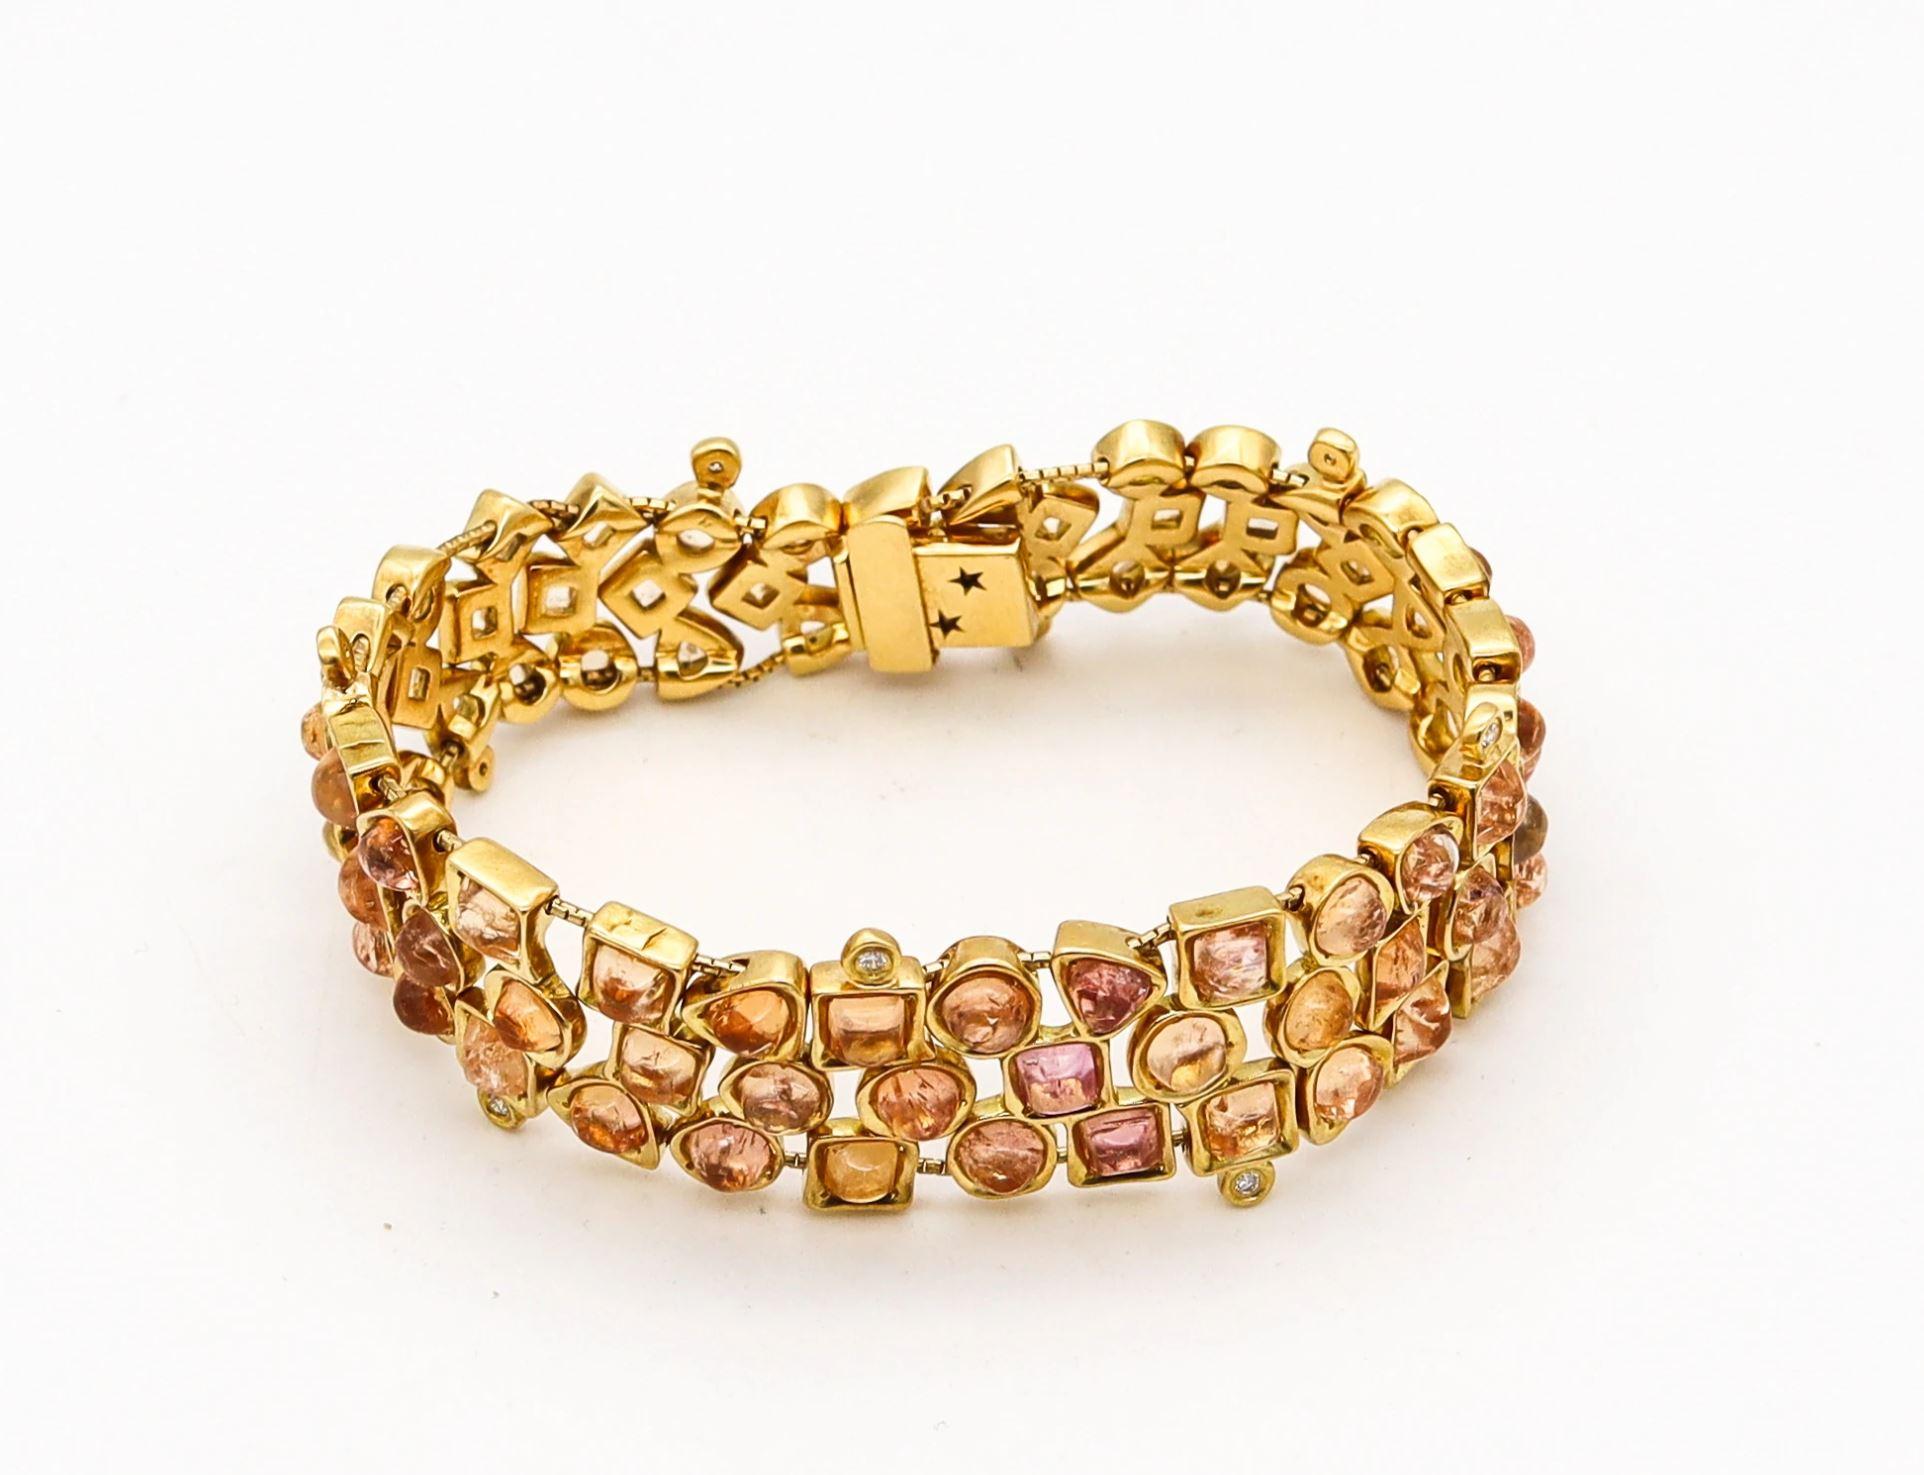 A bracelet designed by H. Stern.

Very nice and unusual bracelet created by the Brazilian jewelry house of H. Stern. This piece has been crafted in solid yellow gold of 18 karats, with high polished finish. It is suited with a boxed push lock and a